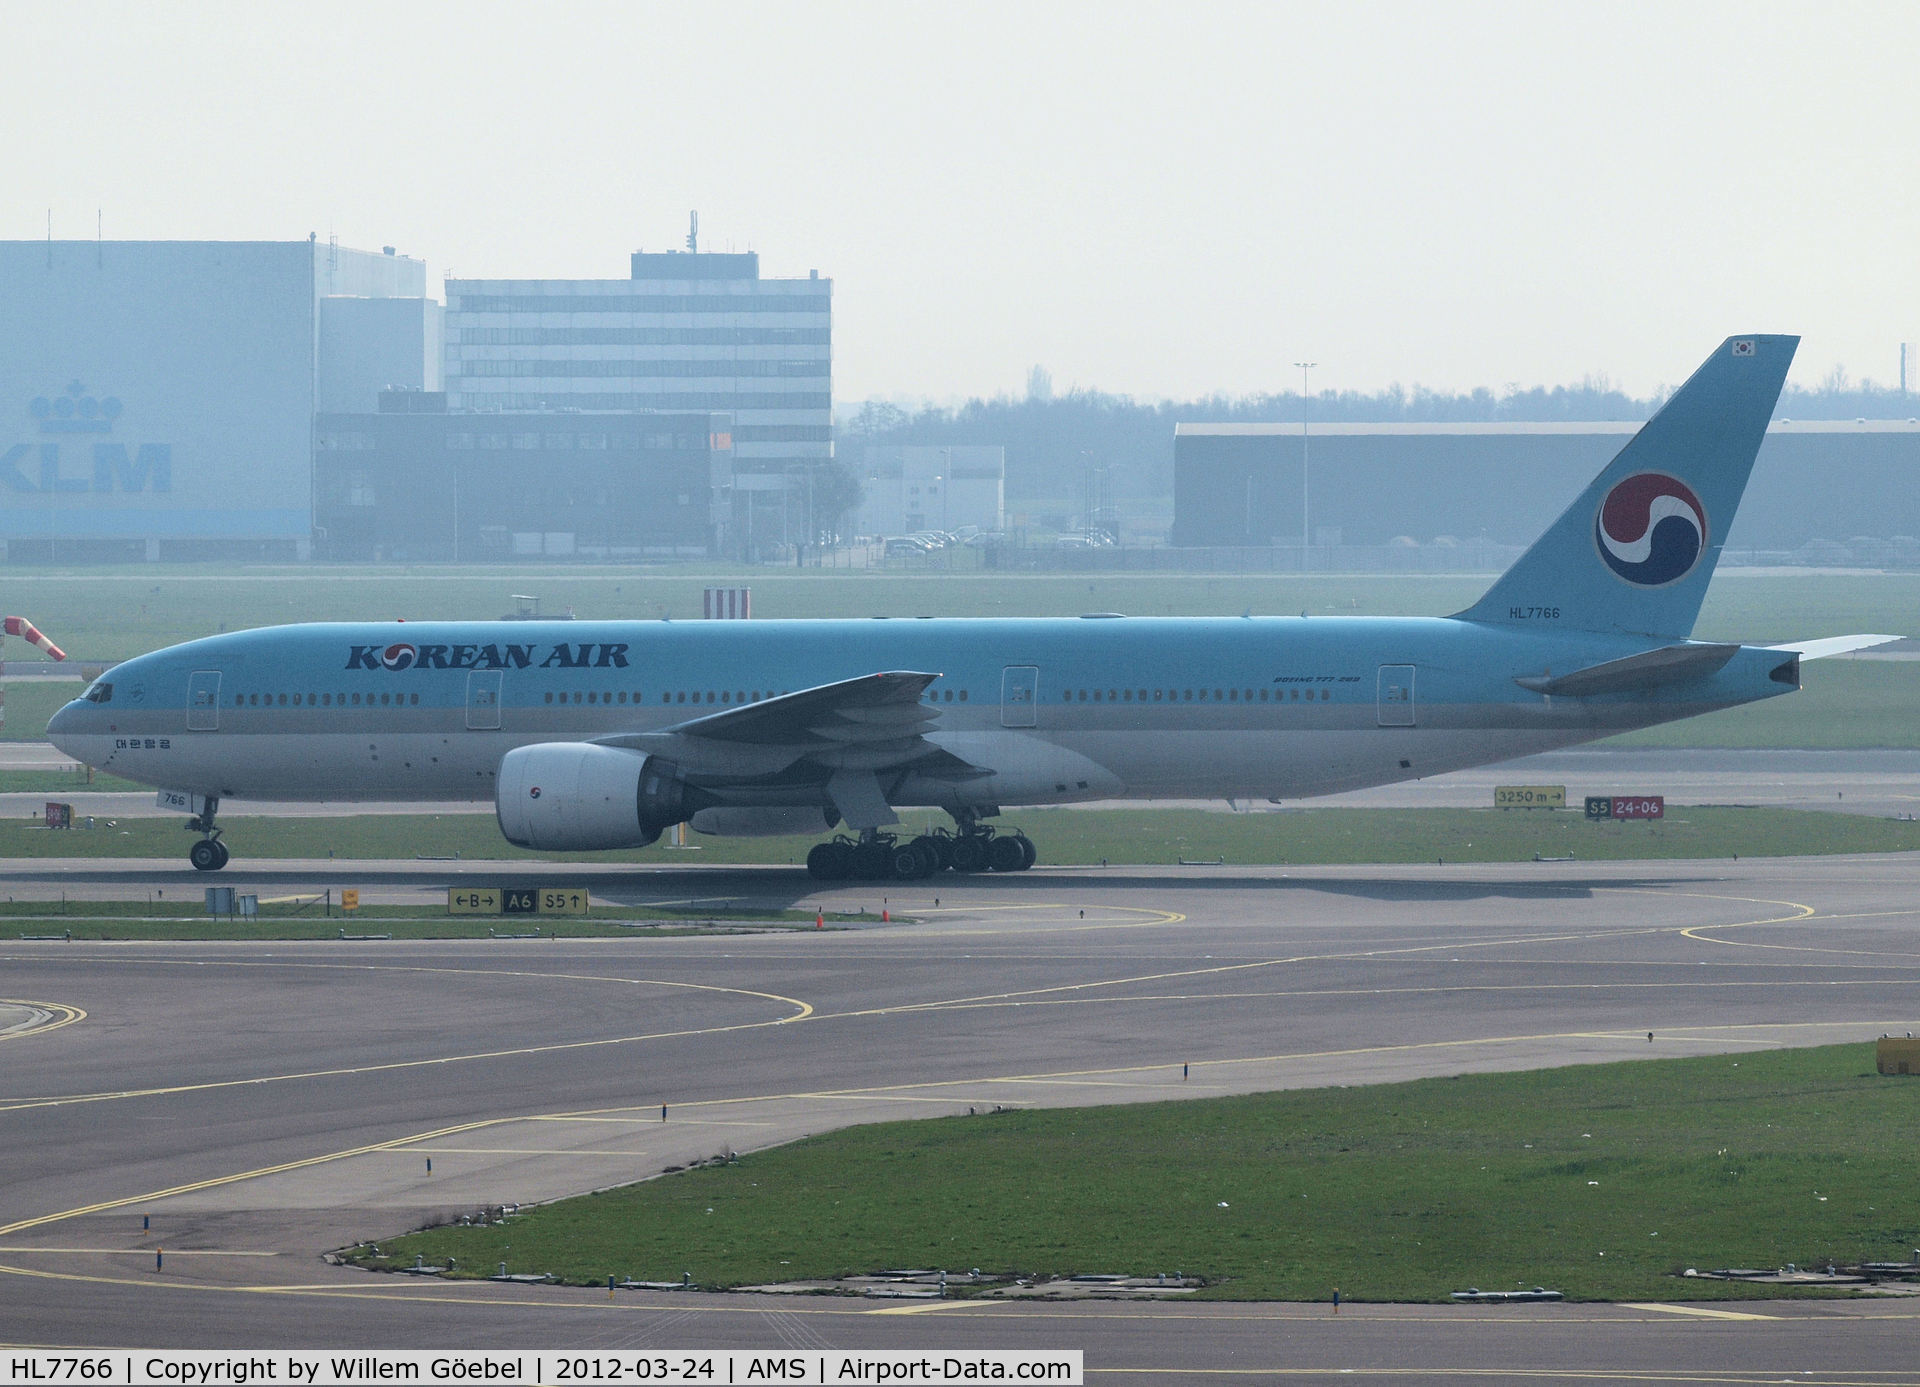 HL7766, 2008 Boeing 777-2B5/ER C/N 34213/730, Arrival on Schiphol Airport and taxi to the gate